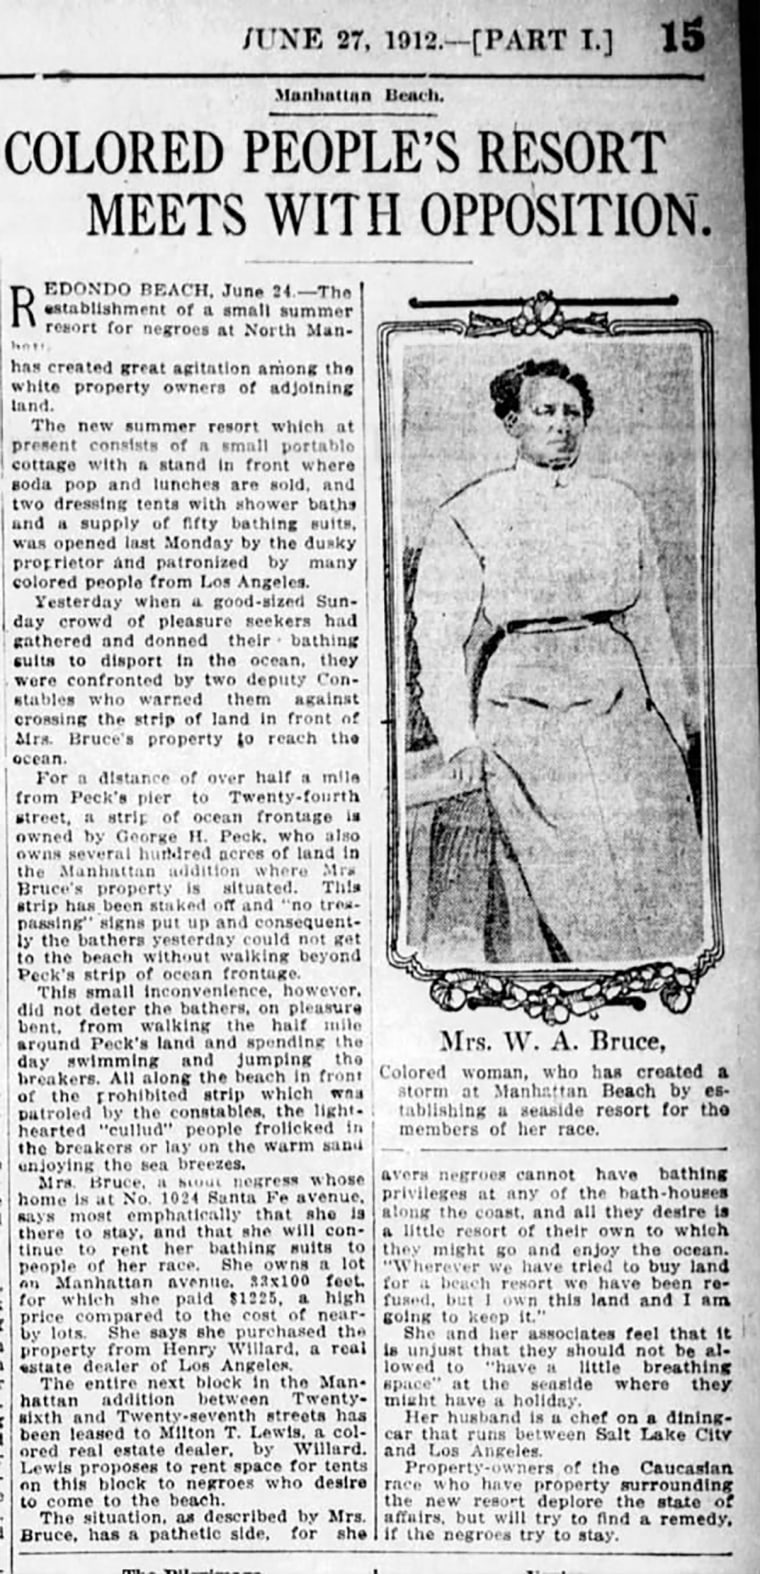 Image: Willa Bruce Los Angeles Times article clipping, 1912